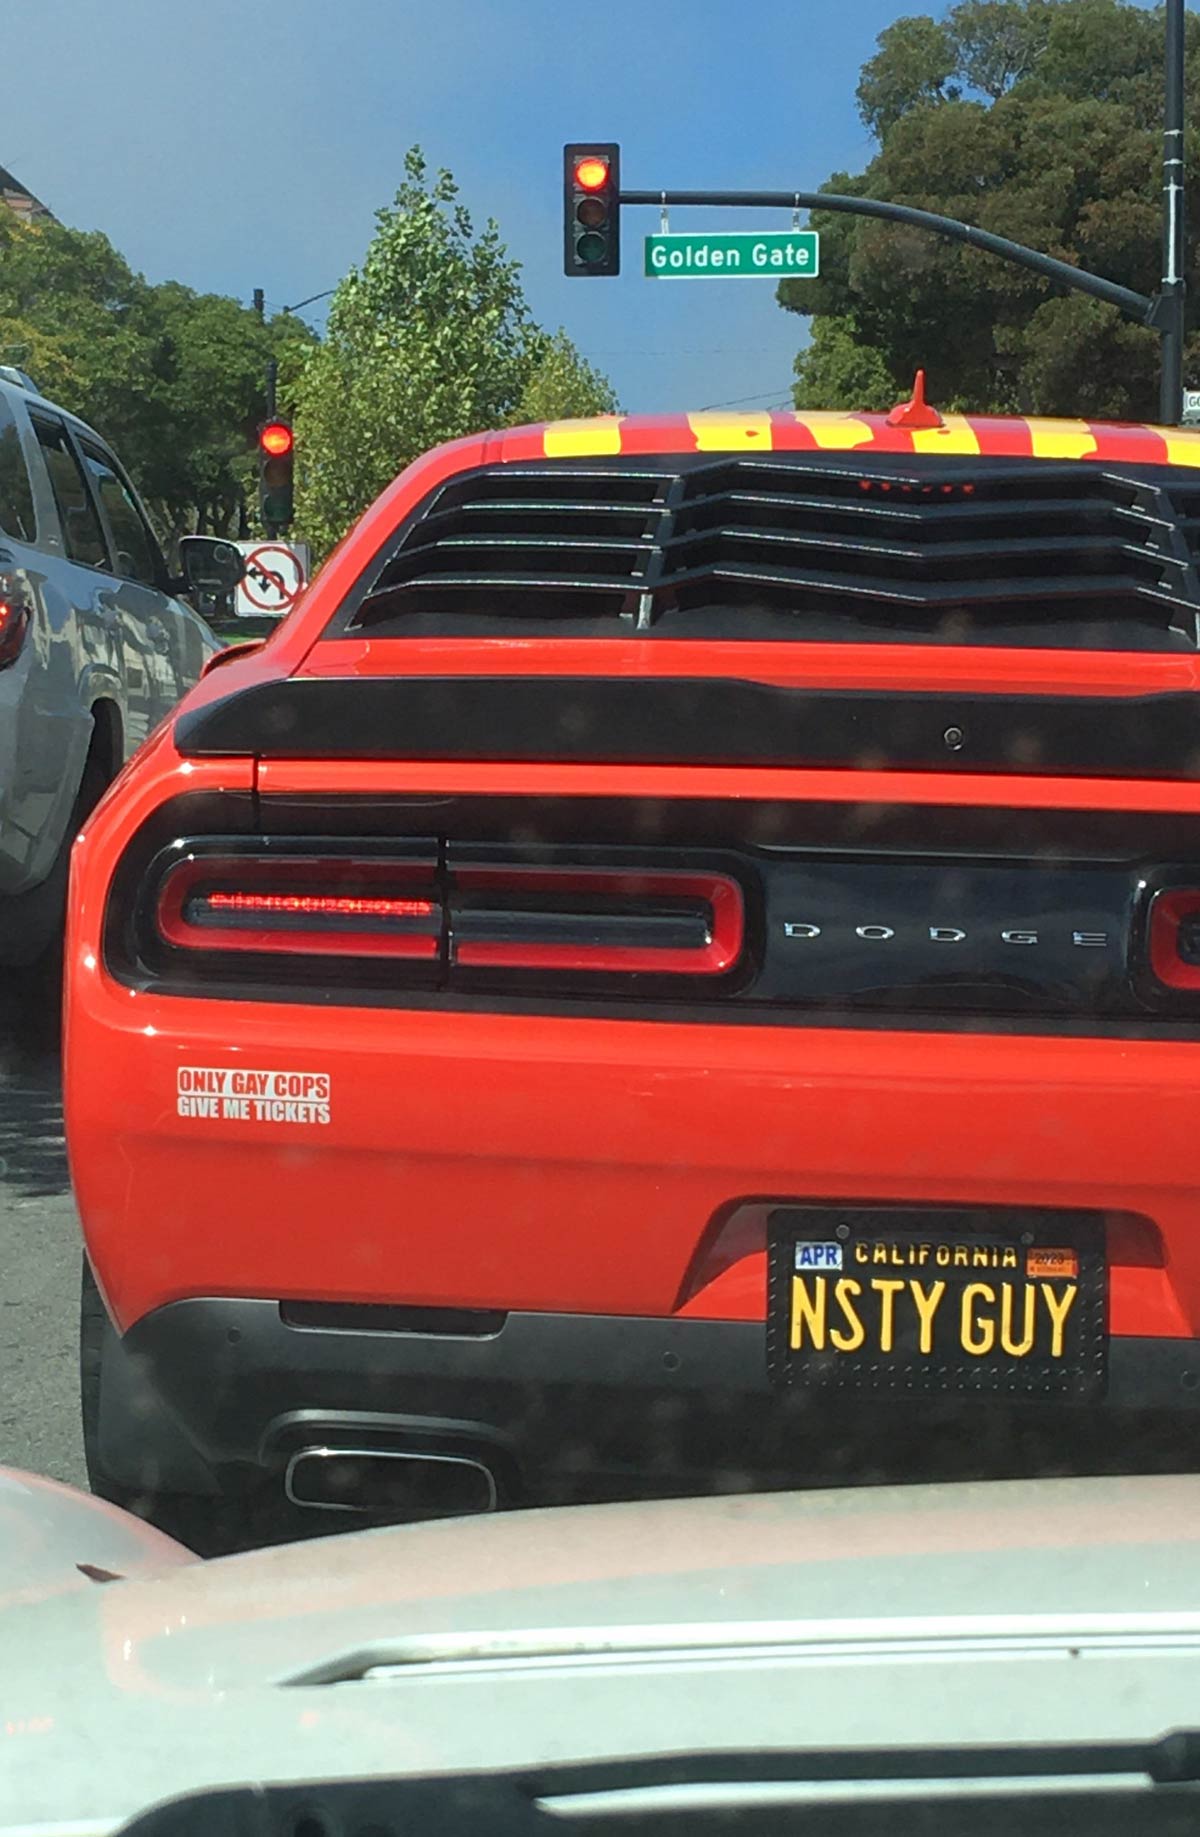 Nasty Guy is looking for trouble in San Francisco with this bumper sticker